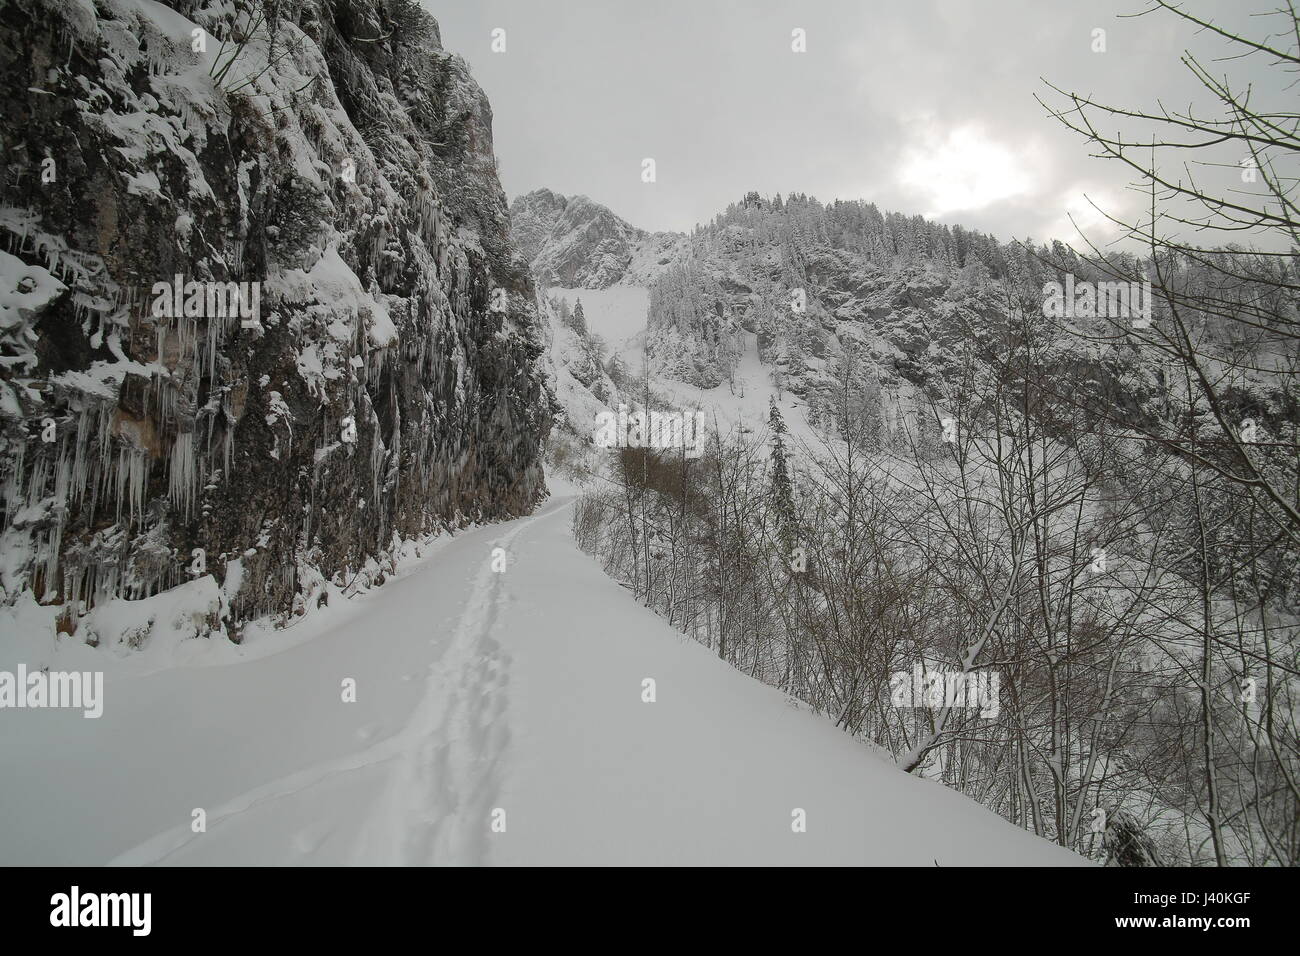 Snow covered road in Chiemgau Alps, Germany. Stock Photo